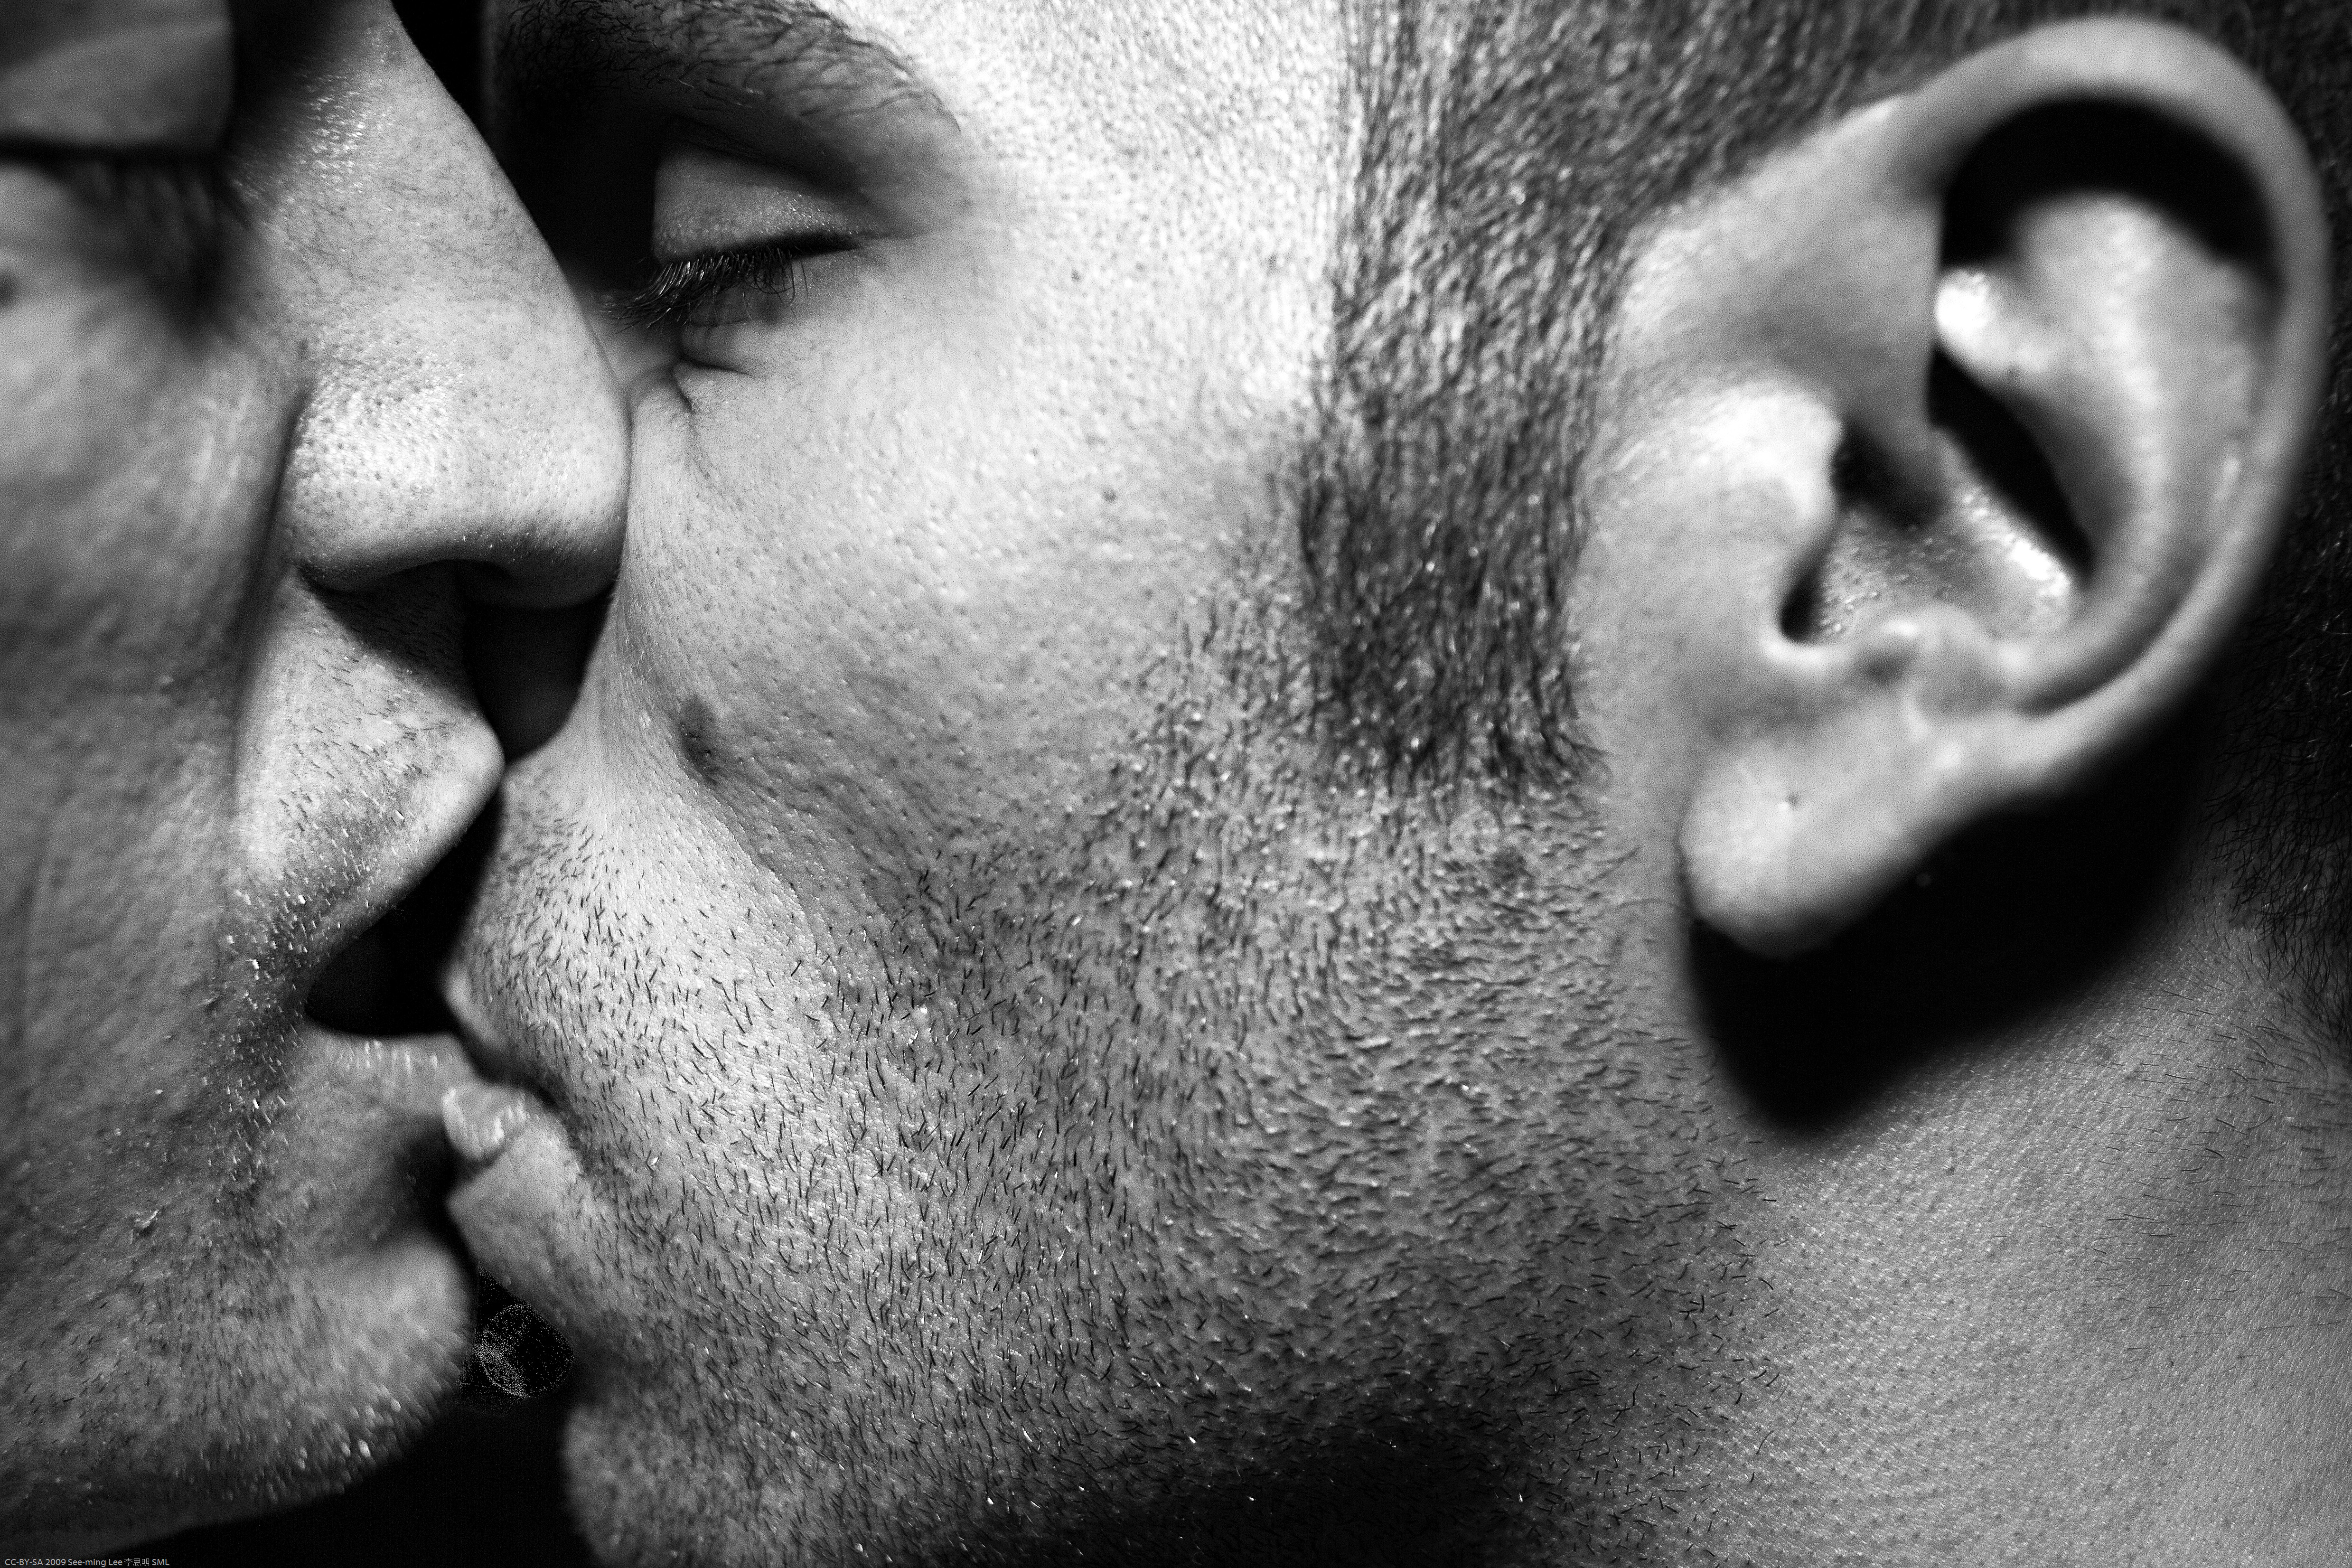 Gay Porn For Women - Straight Men Take Note: 11 Women Confess What They Love About Gay Porn |  Thought Catalog